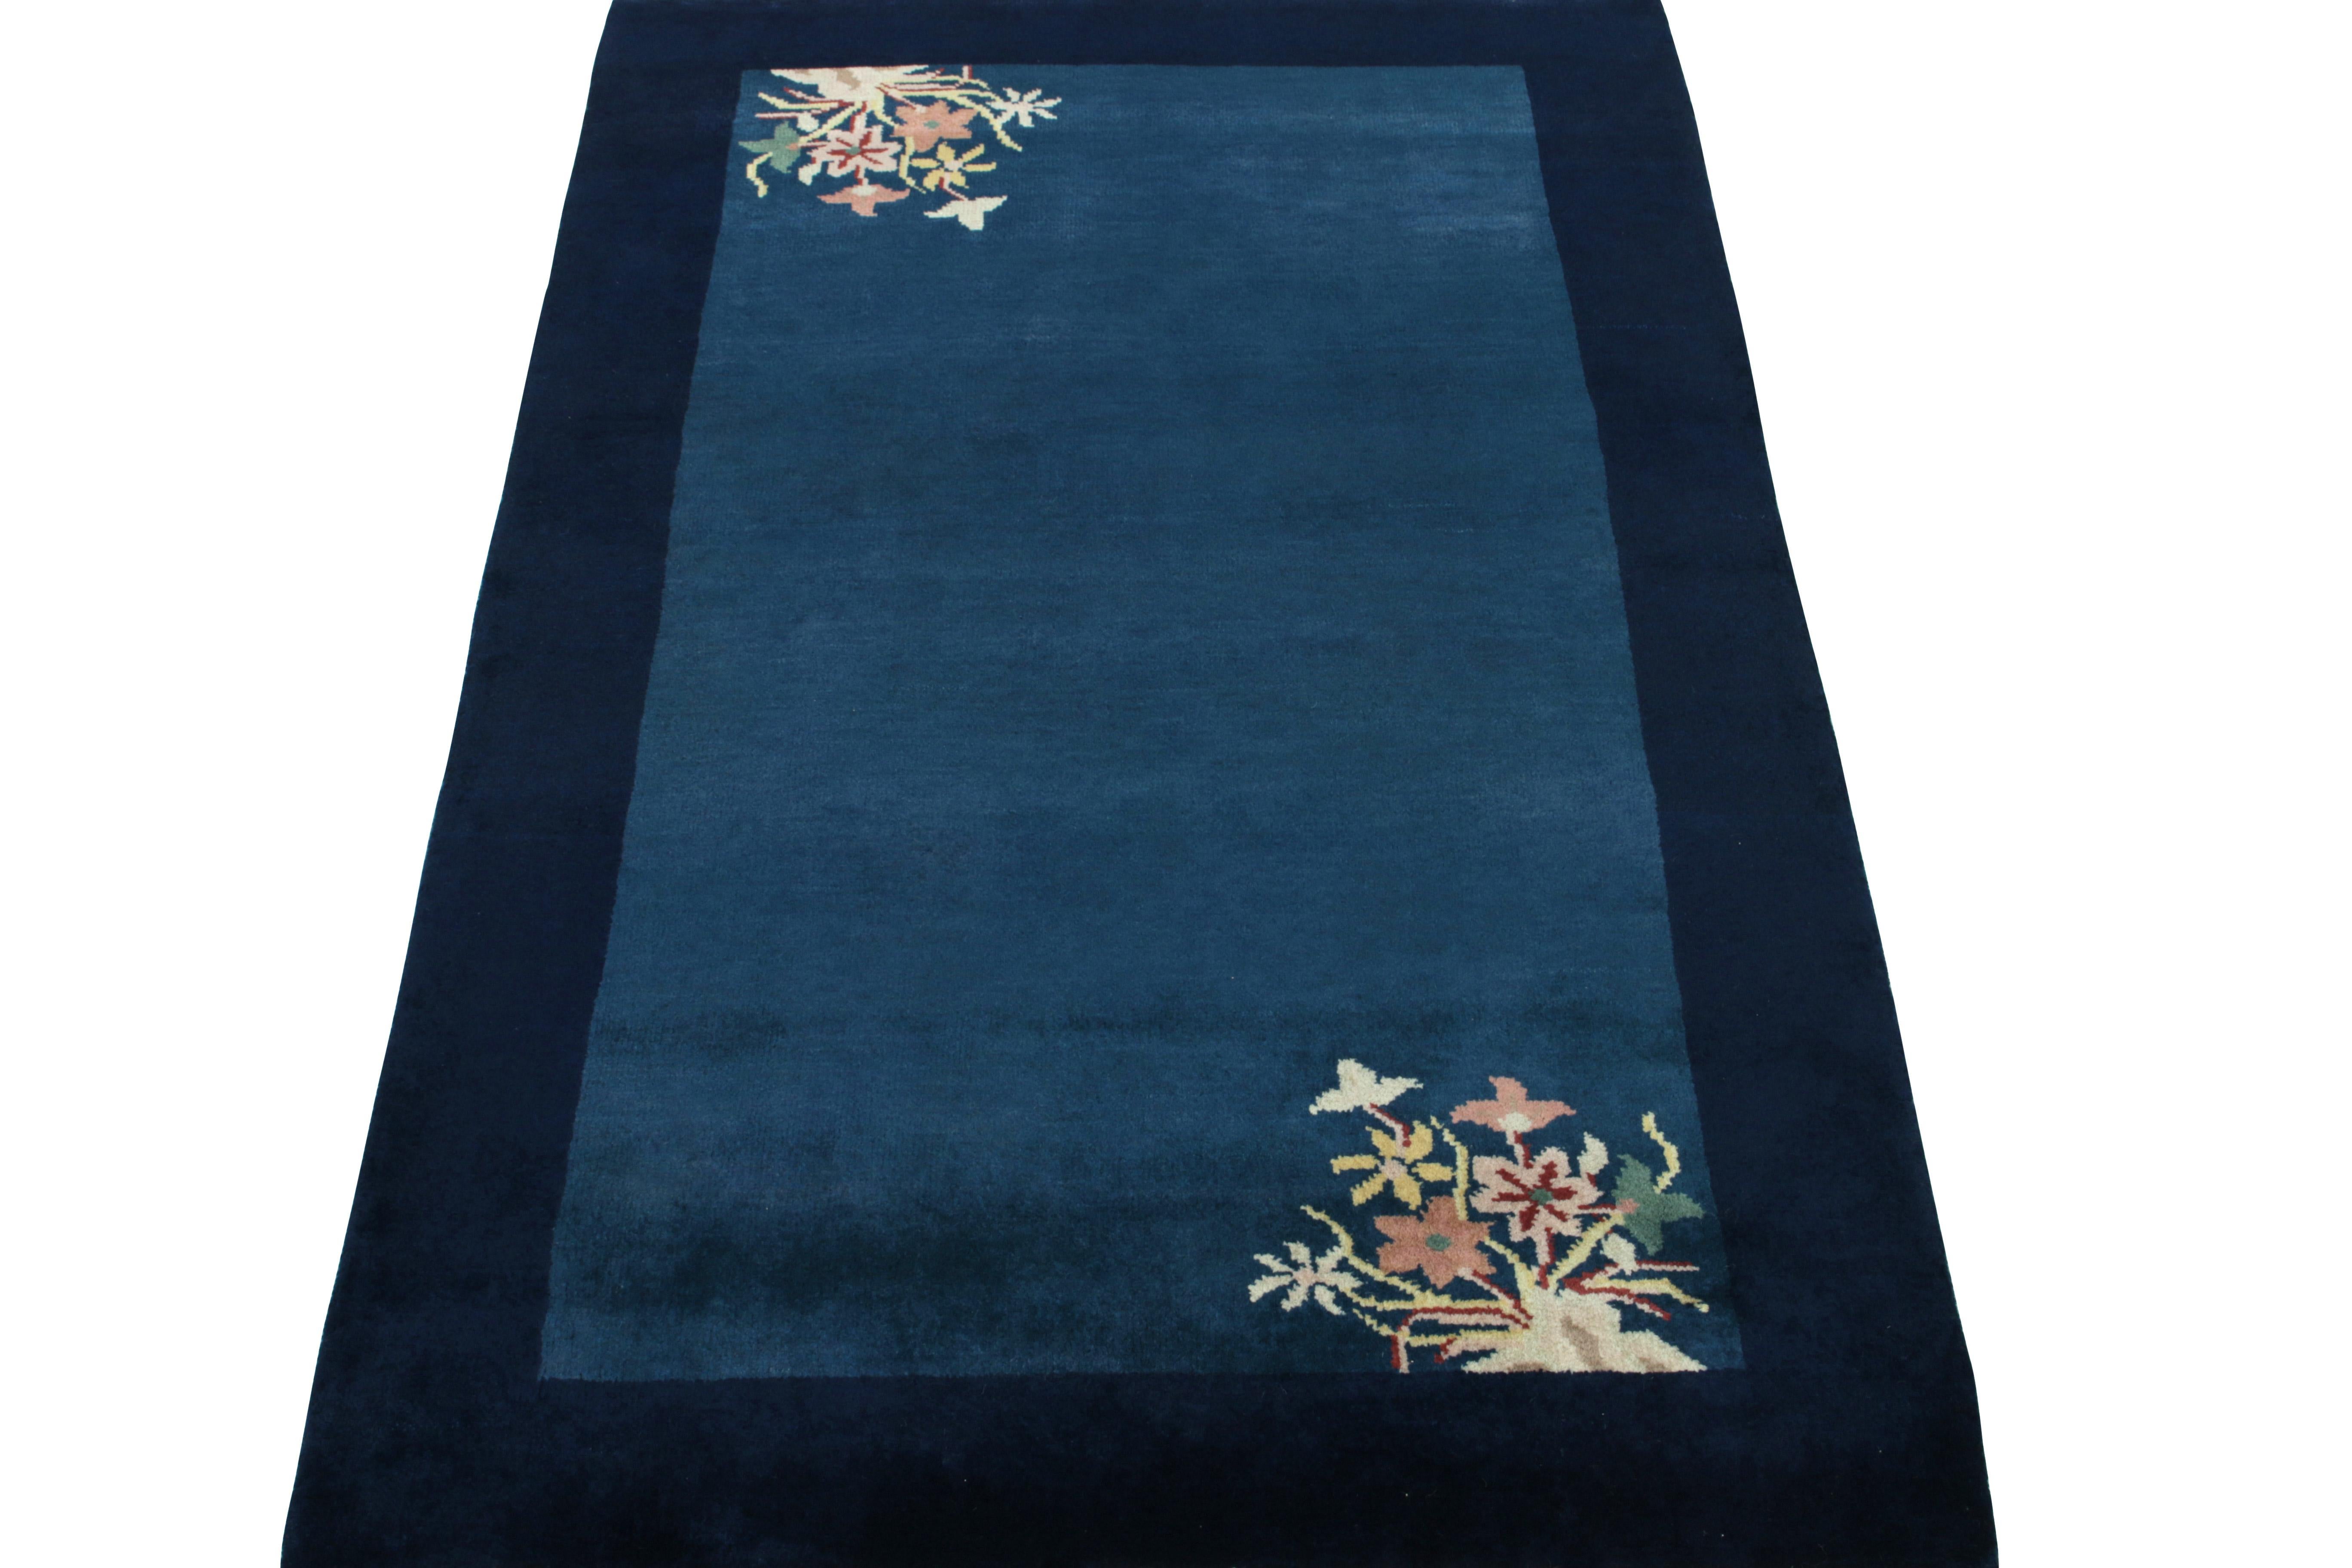 Hand-knotted in luscious wool, a 3x5 vintage art deco rug carrying Chinese sensibilities of the 1920s. The deep blue tones marry the sheen of wool for an alluring luster in a healthy pile, with gentle light and dark spots in blue on the open field